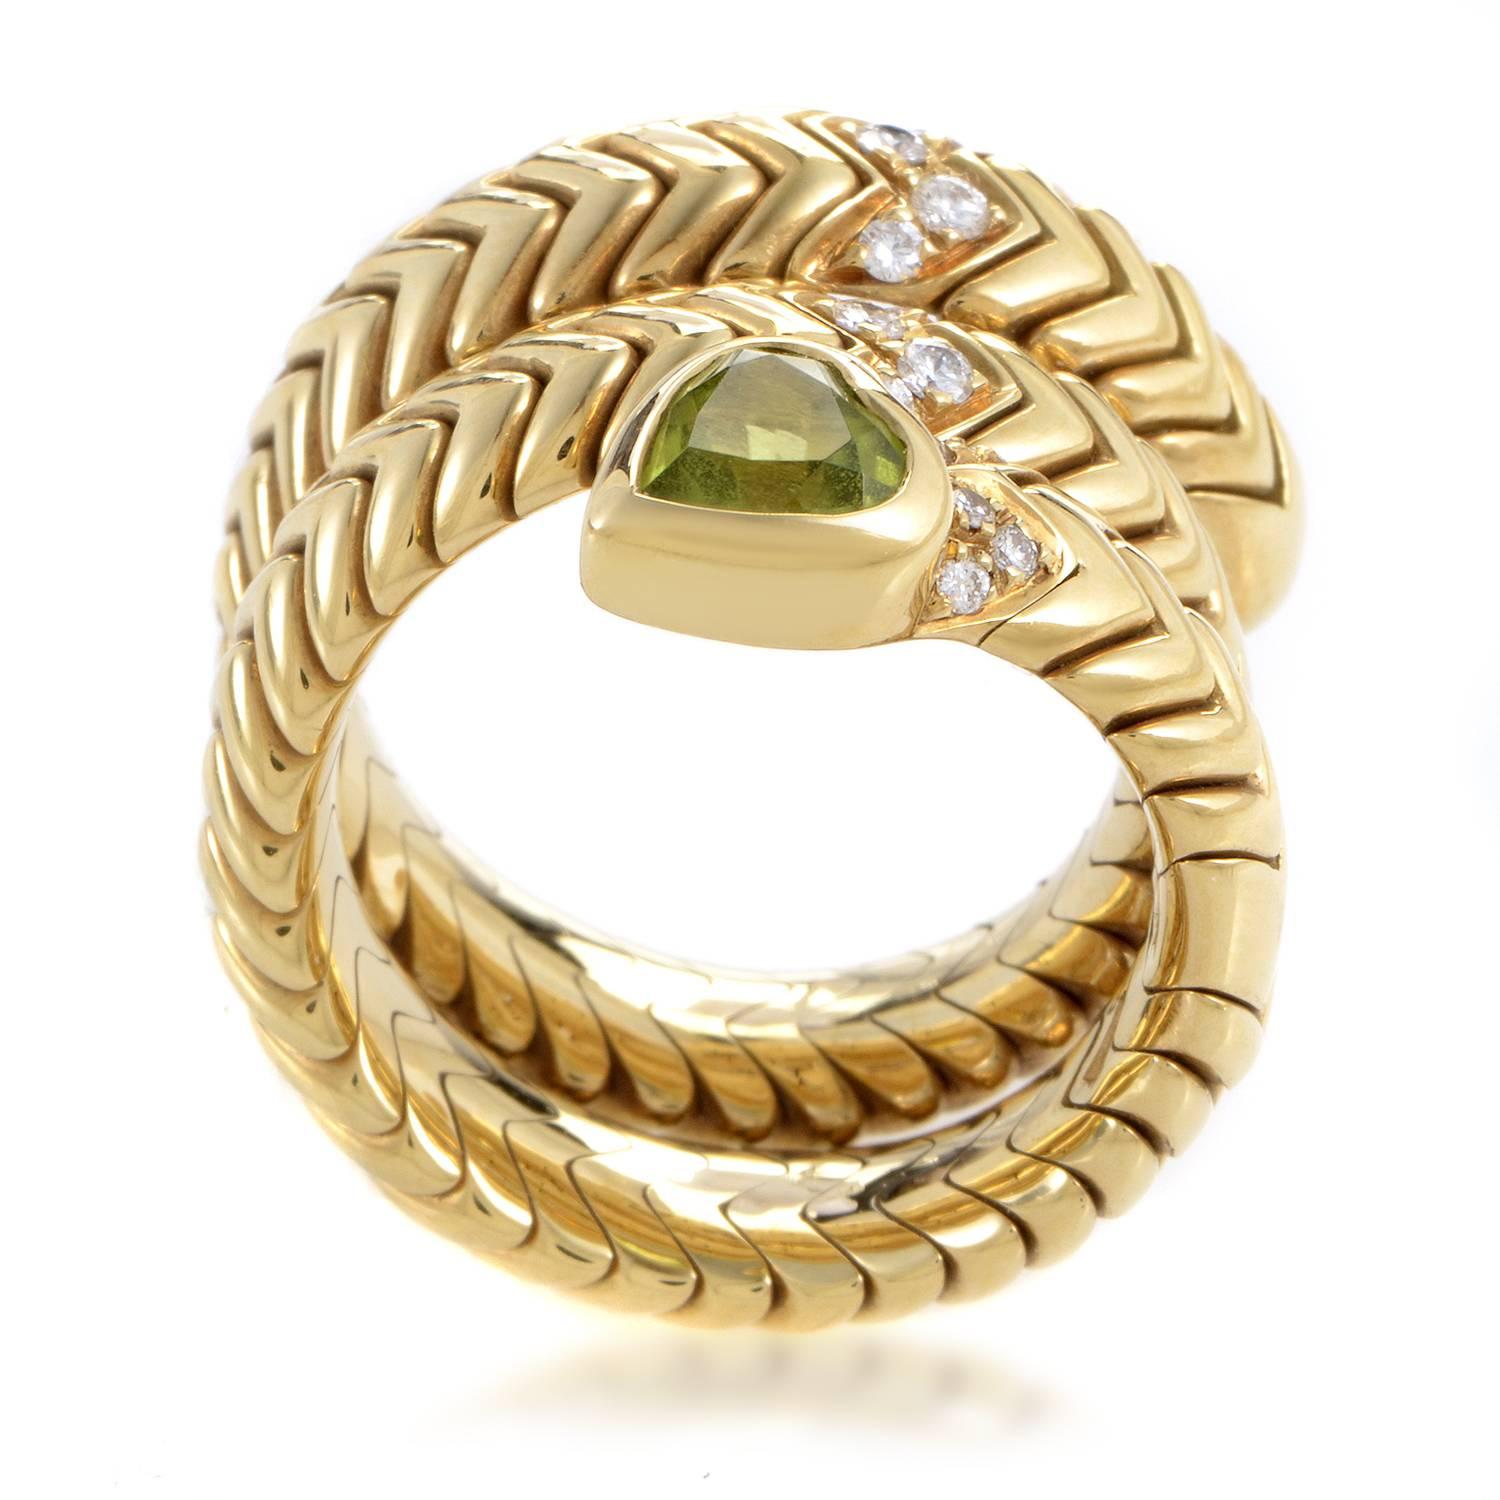 Curling around your finger in graceful snake-like manner, the fabulous 18K yellow gold boasts an intriguing texture which leads your eye up to the splendid peridot stone while sparkling diamonds totaling 0.25ct embellish the upper part of this